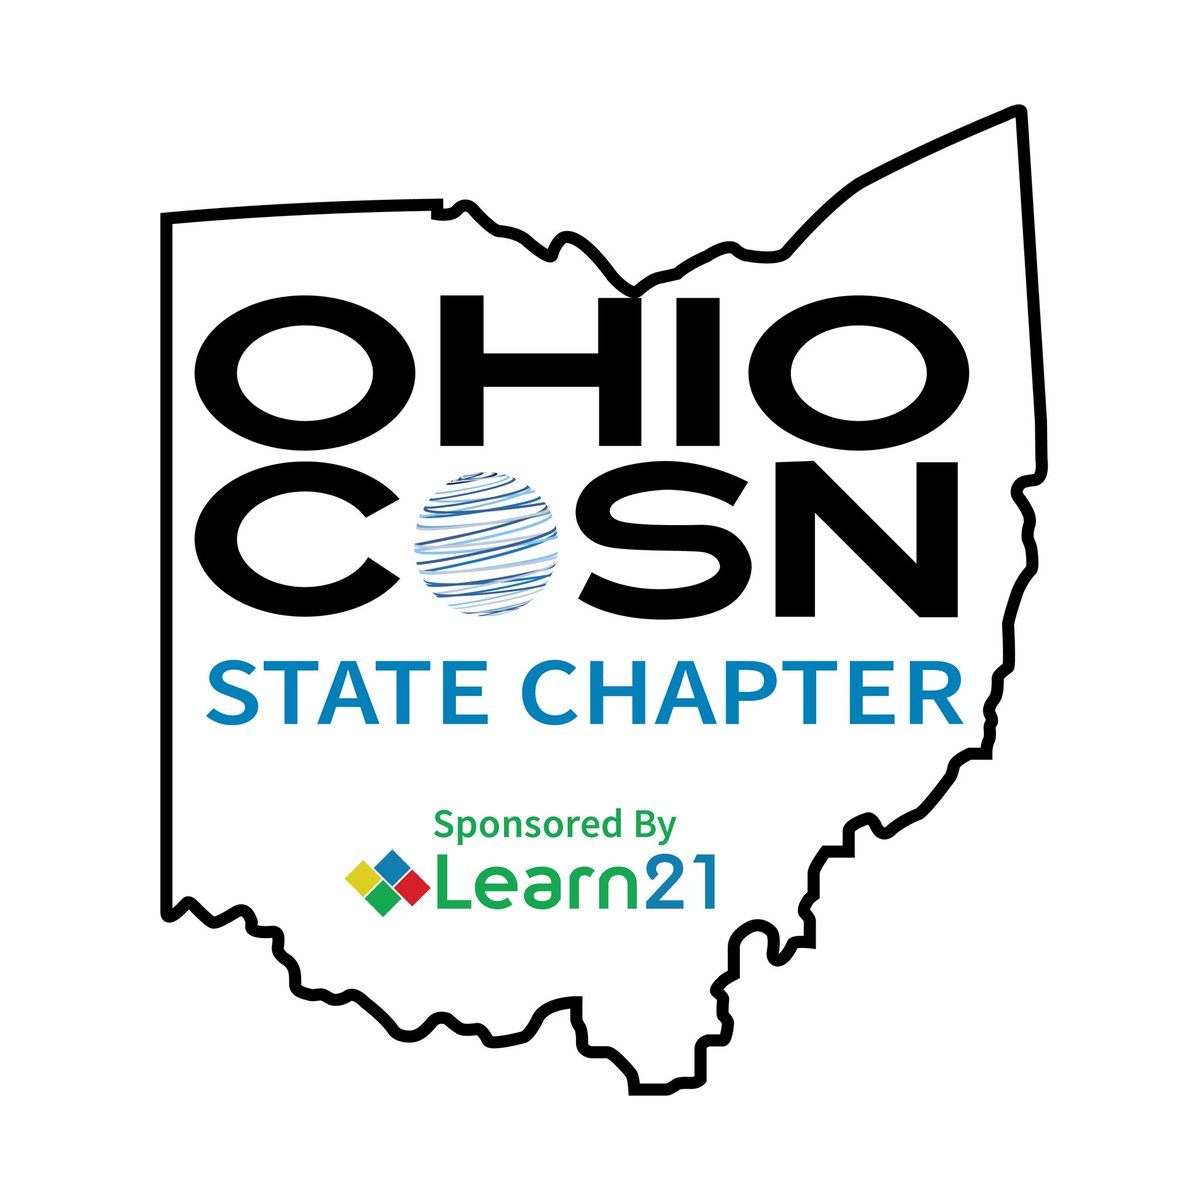 BIG shoutout to @Learn21Team for sponsoring #OhioCoSN allowing us to Educate, Advocate, Celebrate, and Promote Ohio EdTech Leaders! Thank you Learn21!